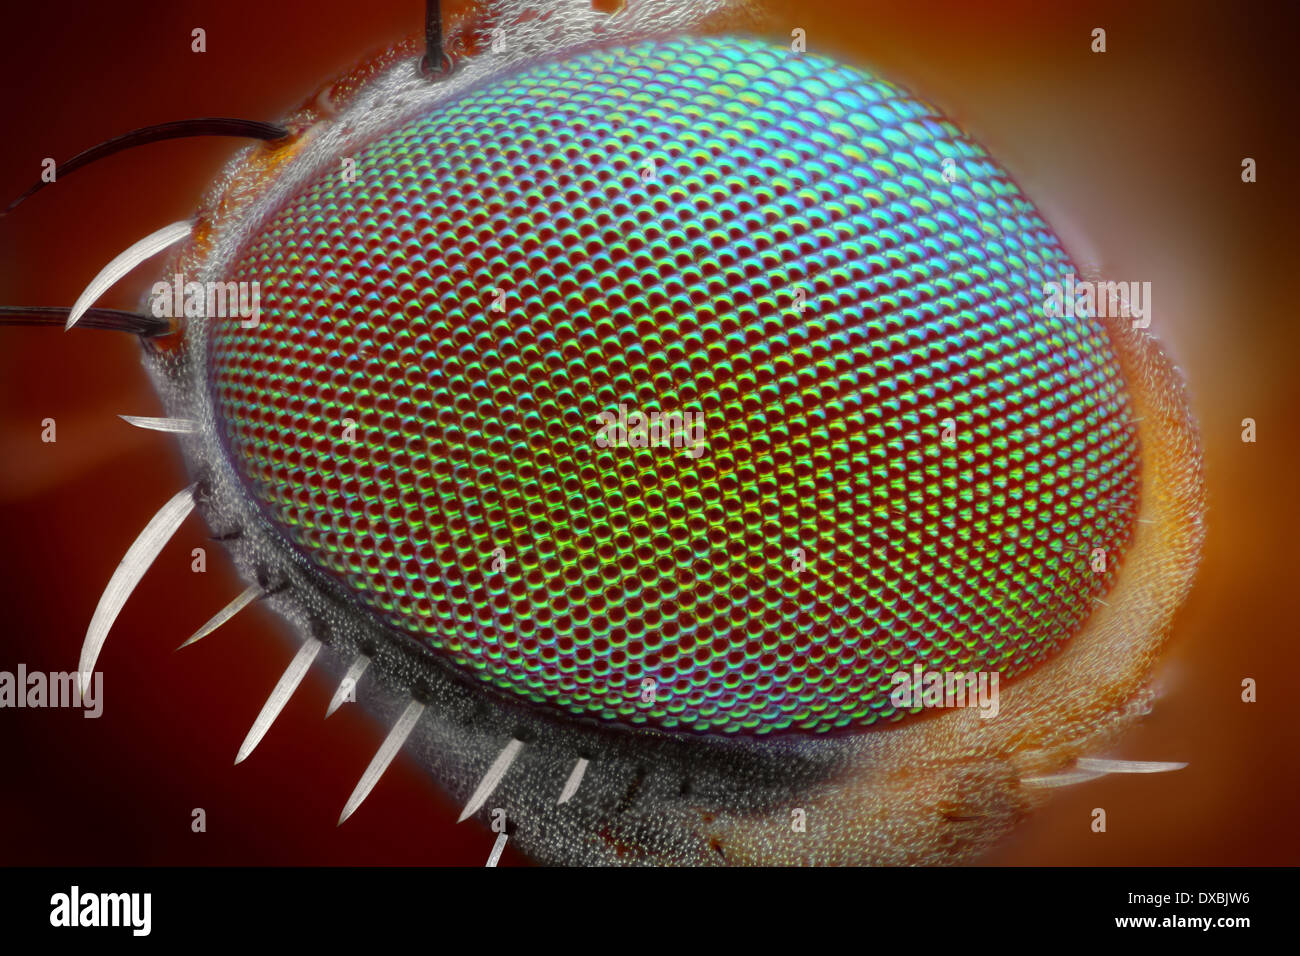 Extreme sharp and detailed fly compound eye surface at extreme magnification Stock Photo